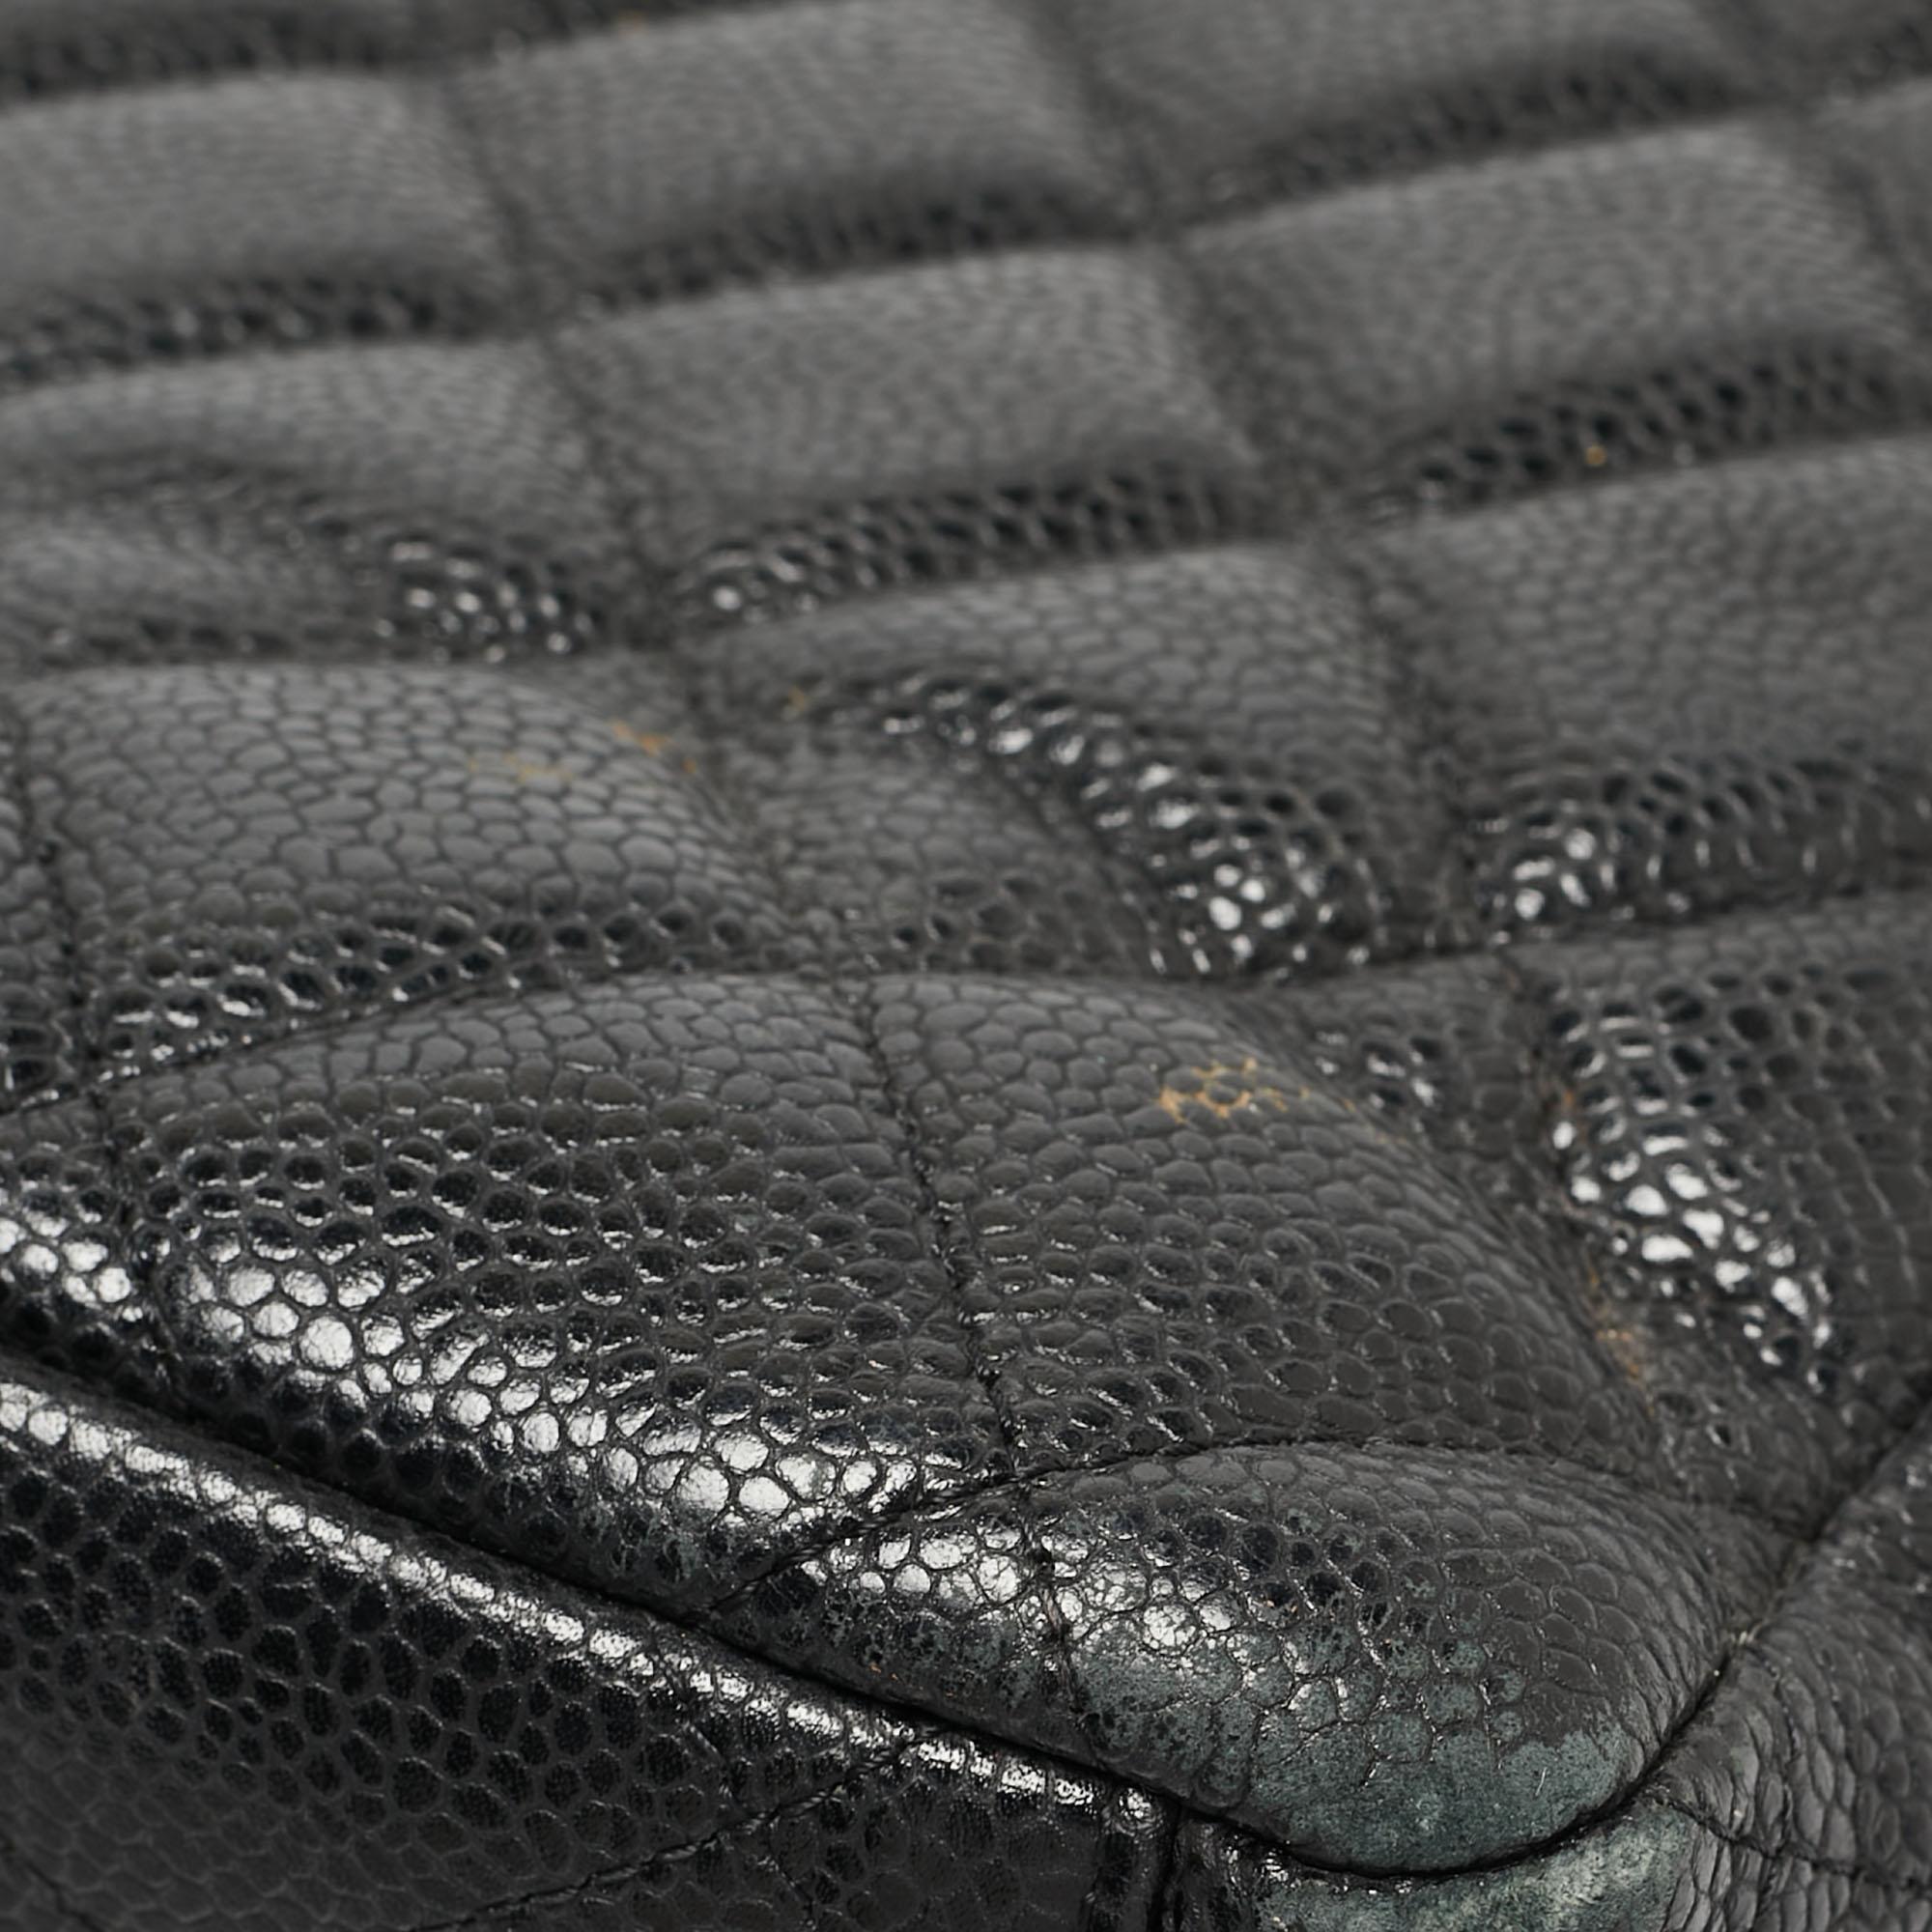 Women's Chanel Black Quilted Caviar Leather Maxi Classic Single Flap Bag For Sale